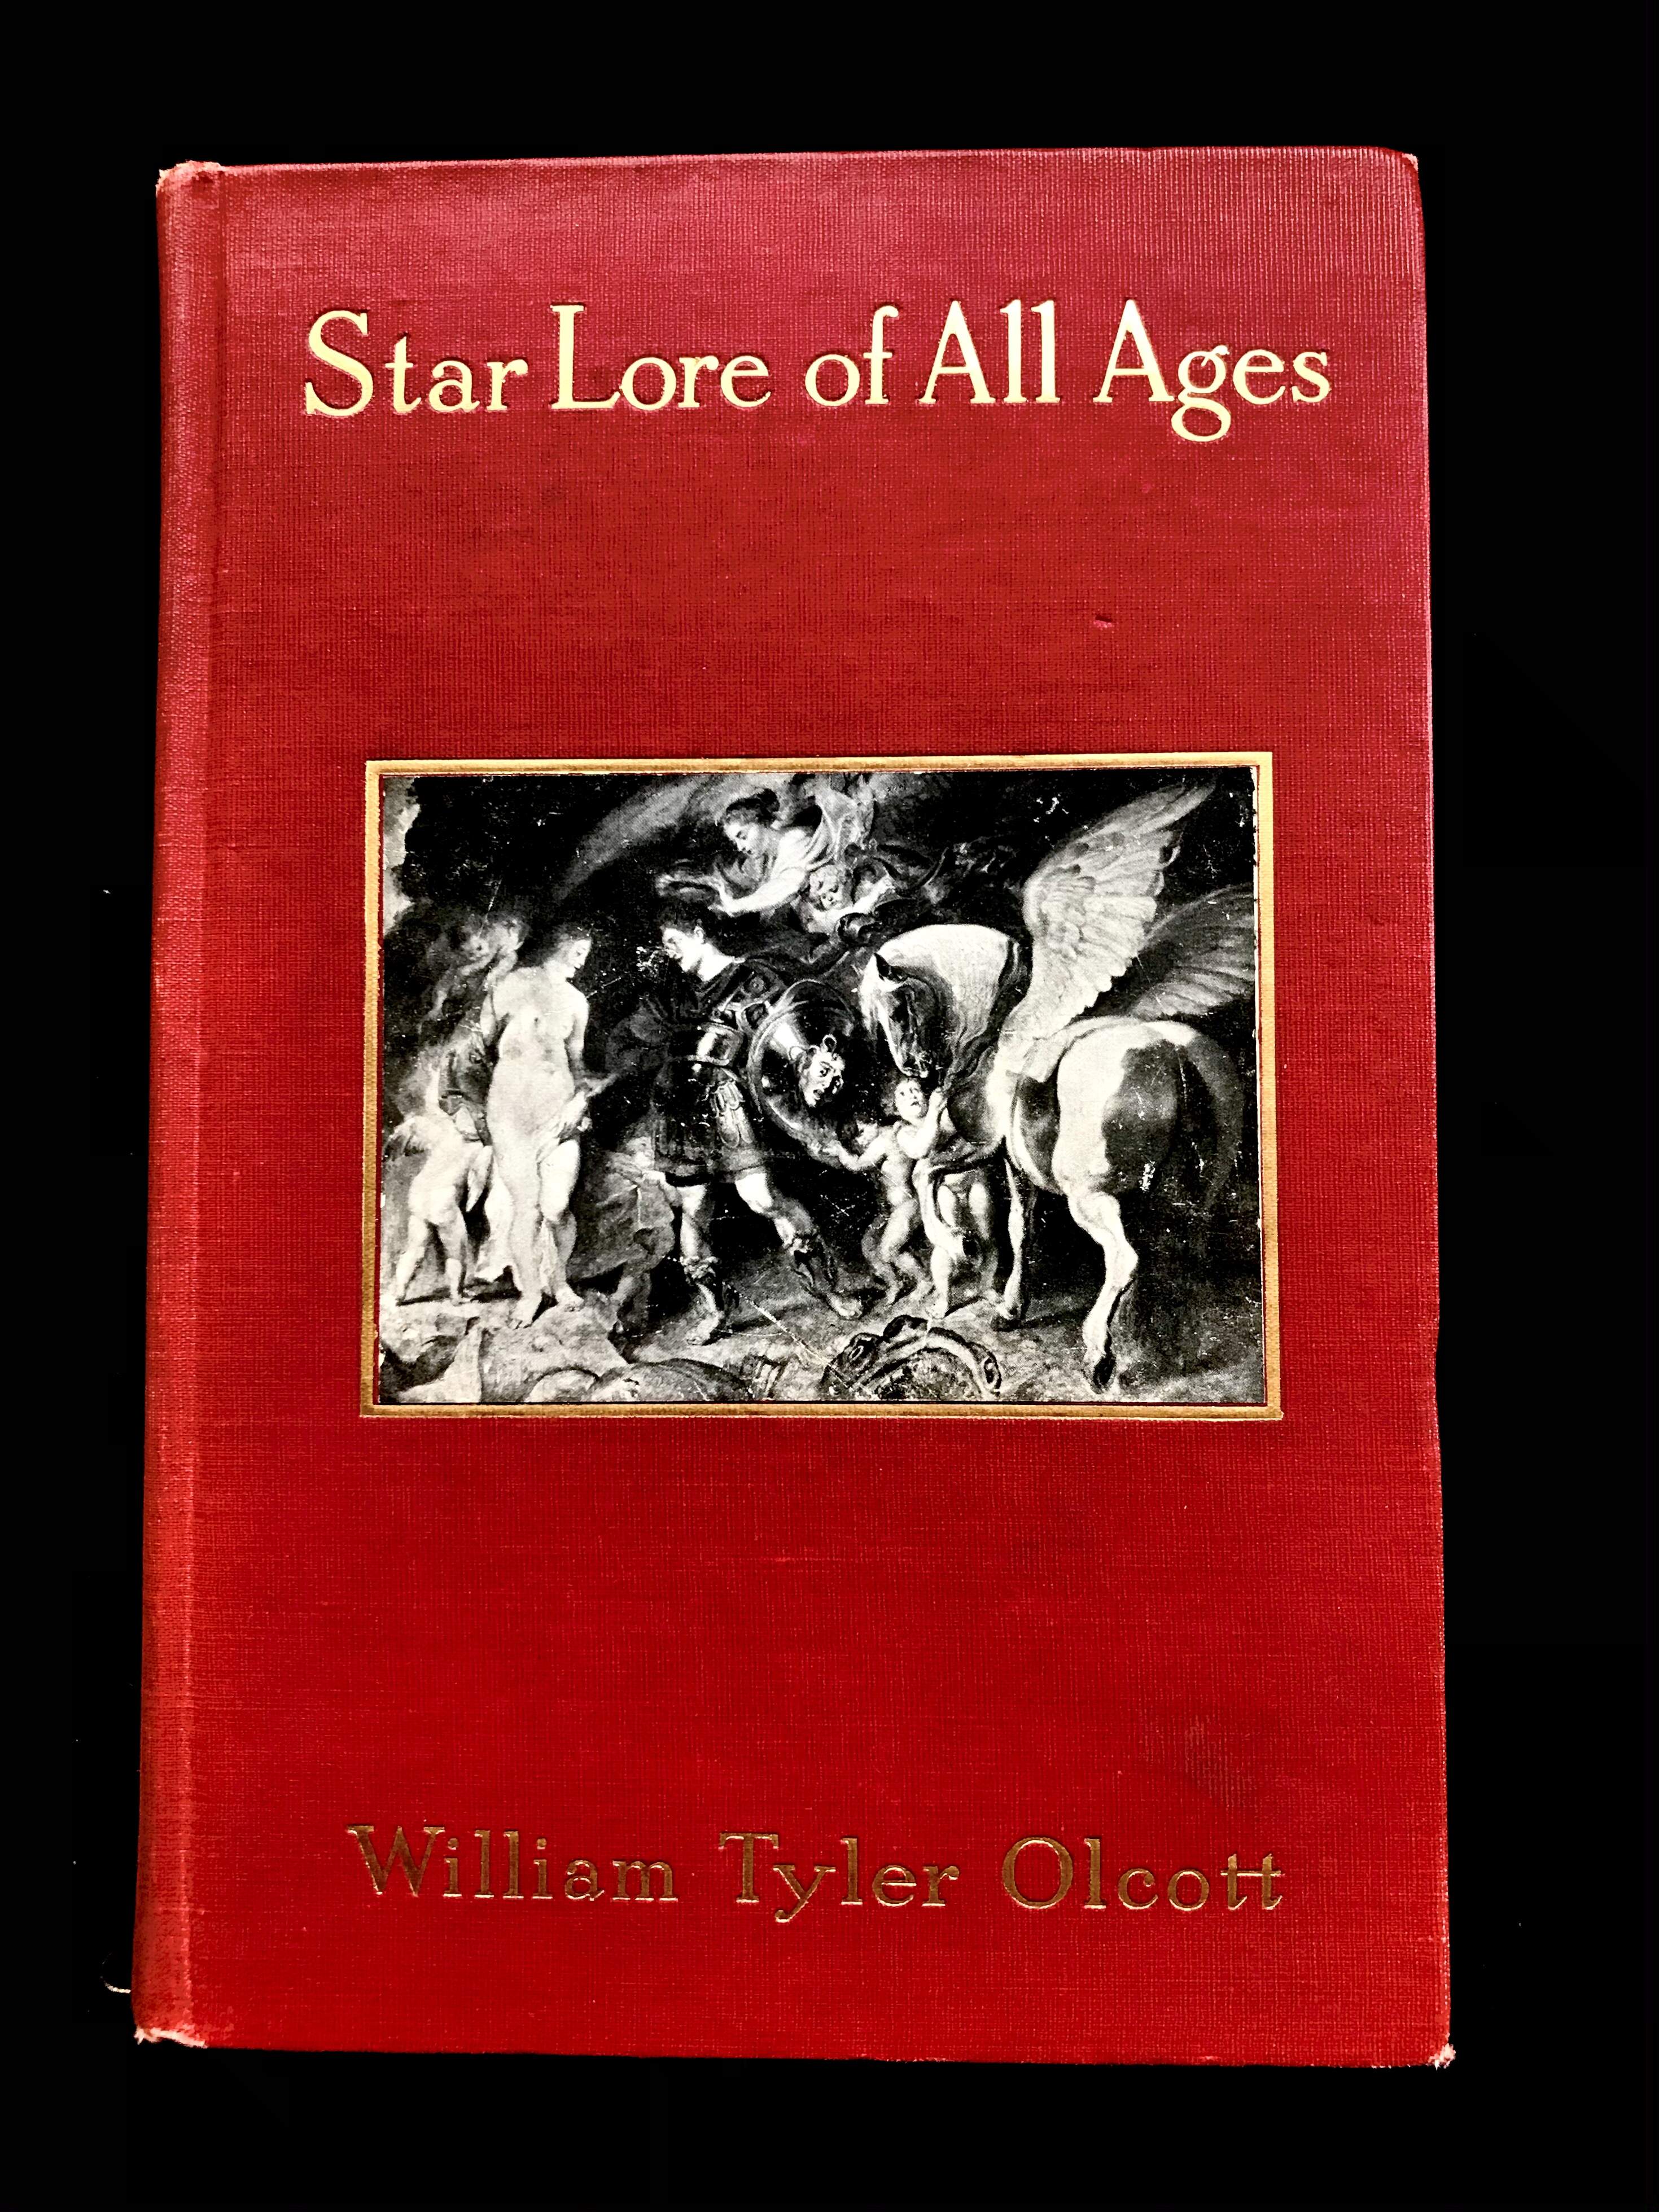 Star Lore of All Ages by William Tyler Olcott